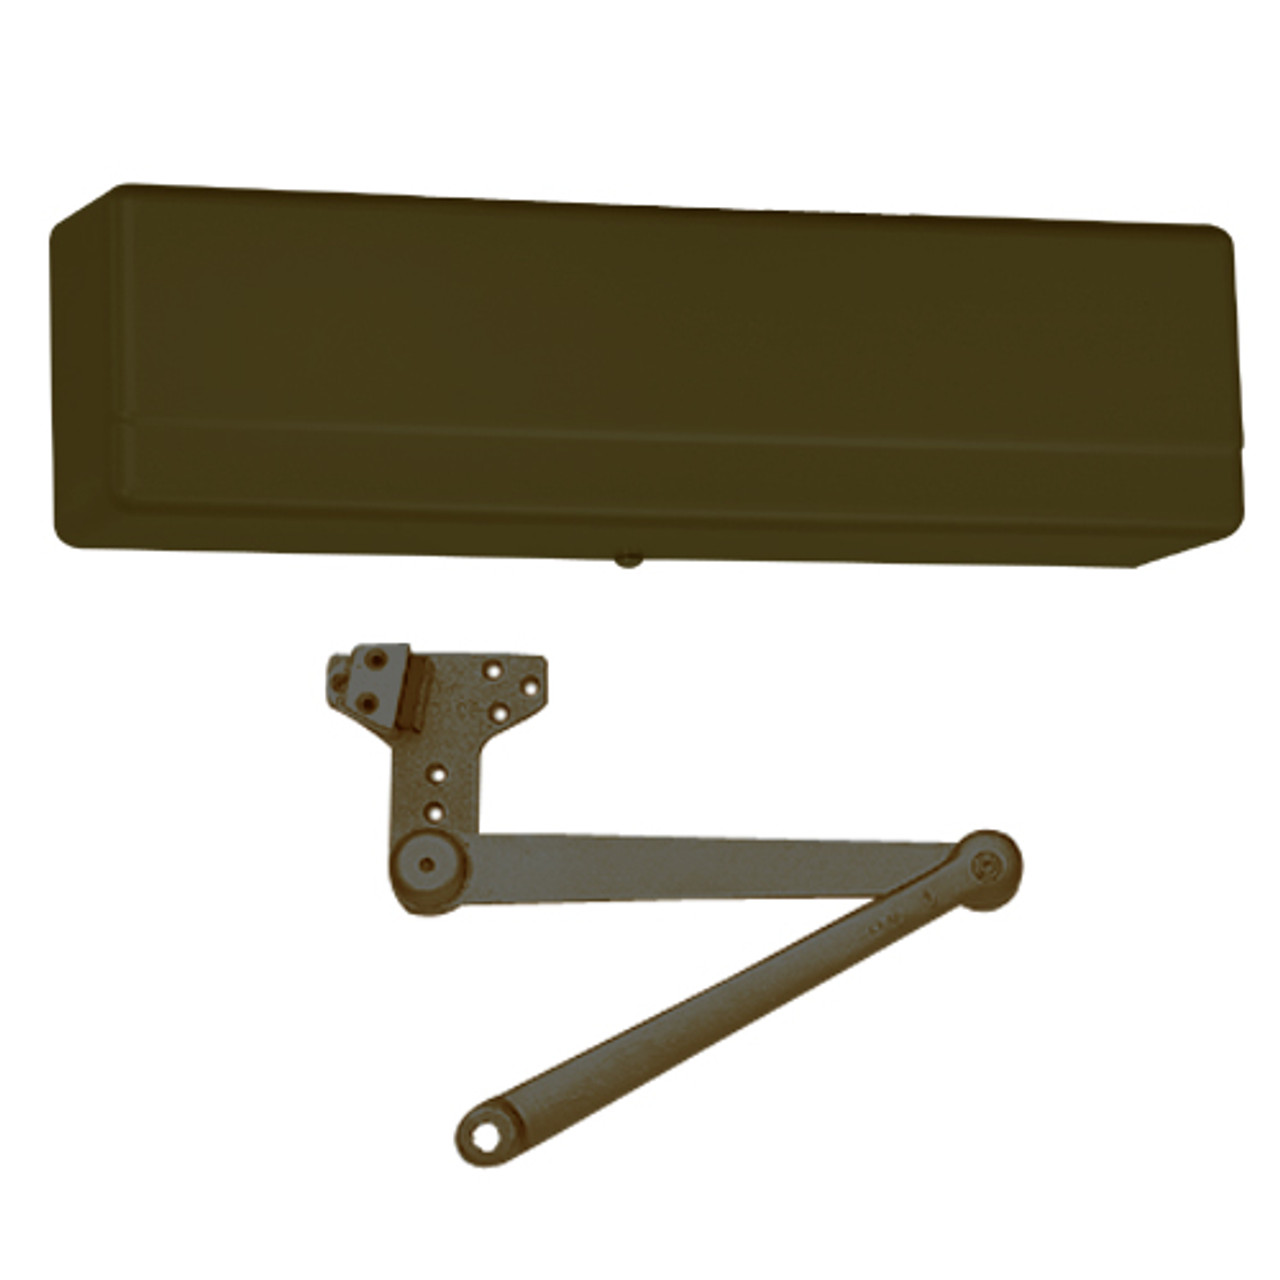 1431-CPS-EB Sargent 1431 Series Powerglide Door Closer with CPS - Heavy Duty Parallel Arm with Compression Stop in Bronze Powder Coat